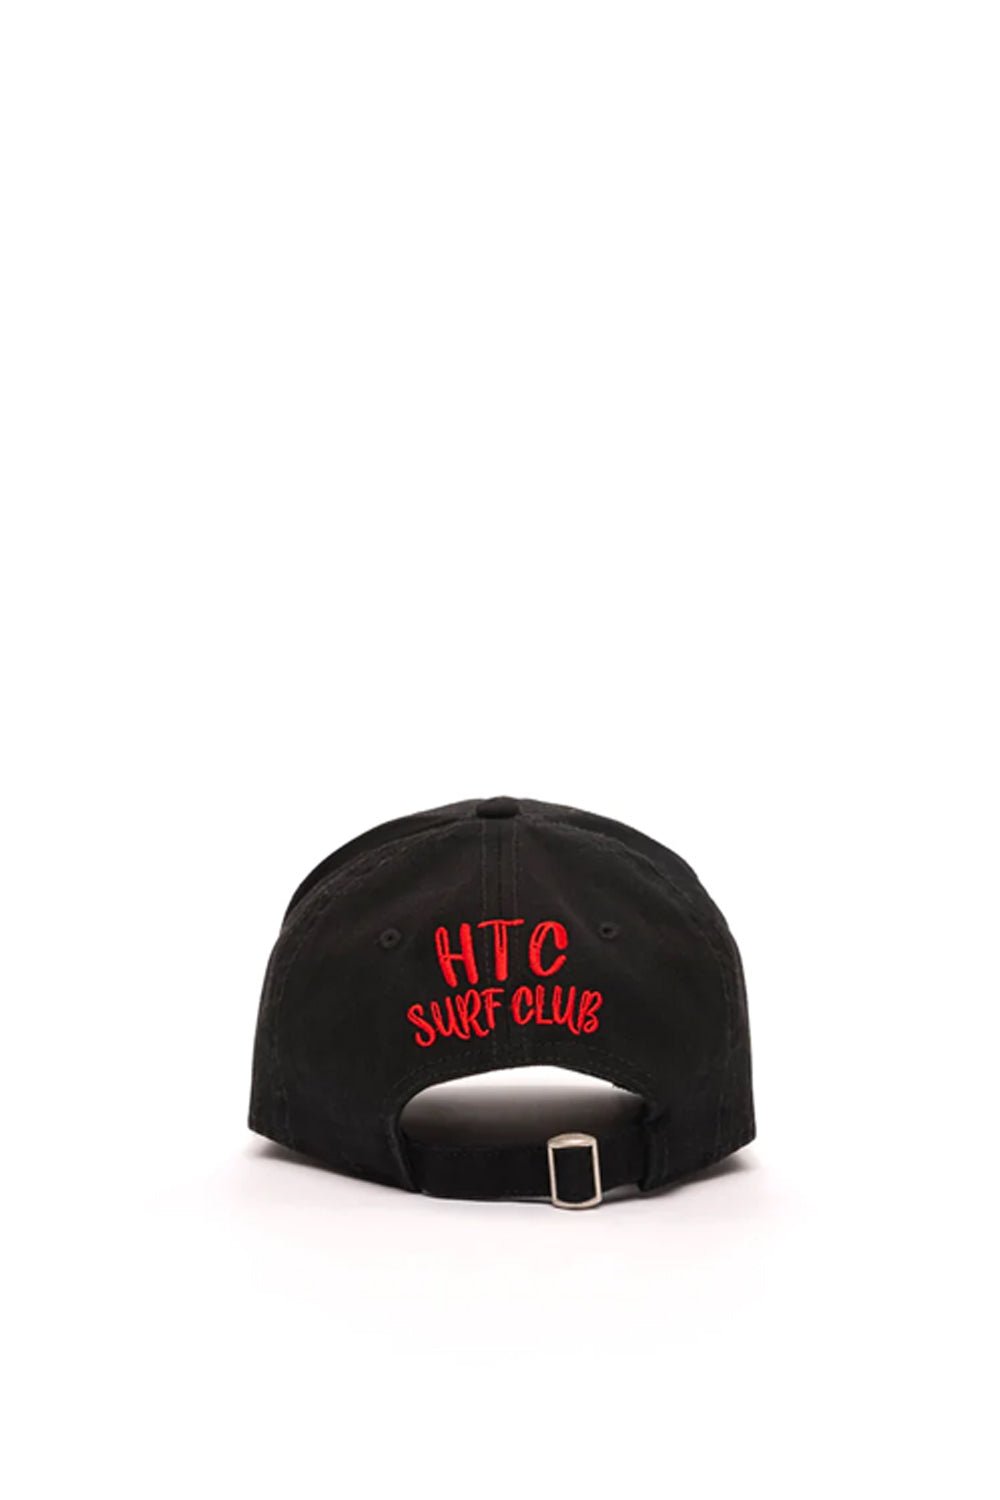 SURF CLUB CAP Limited Edition Black baseball cap with preformed peak, round crown with eyelets,'HTC SURF CLUB' logo printed on the front, adjustable strap on the back. One size fits all. 100% cotton. HTC LOS ANGELES